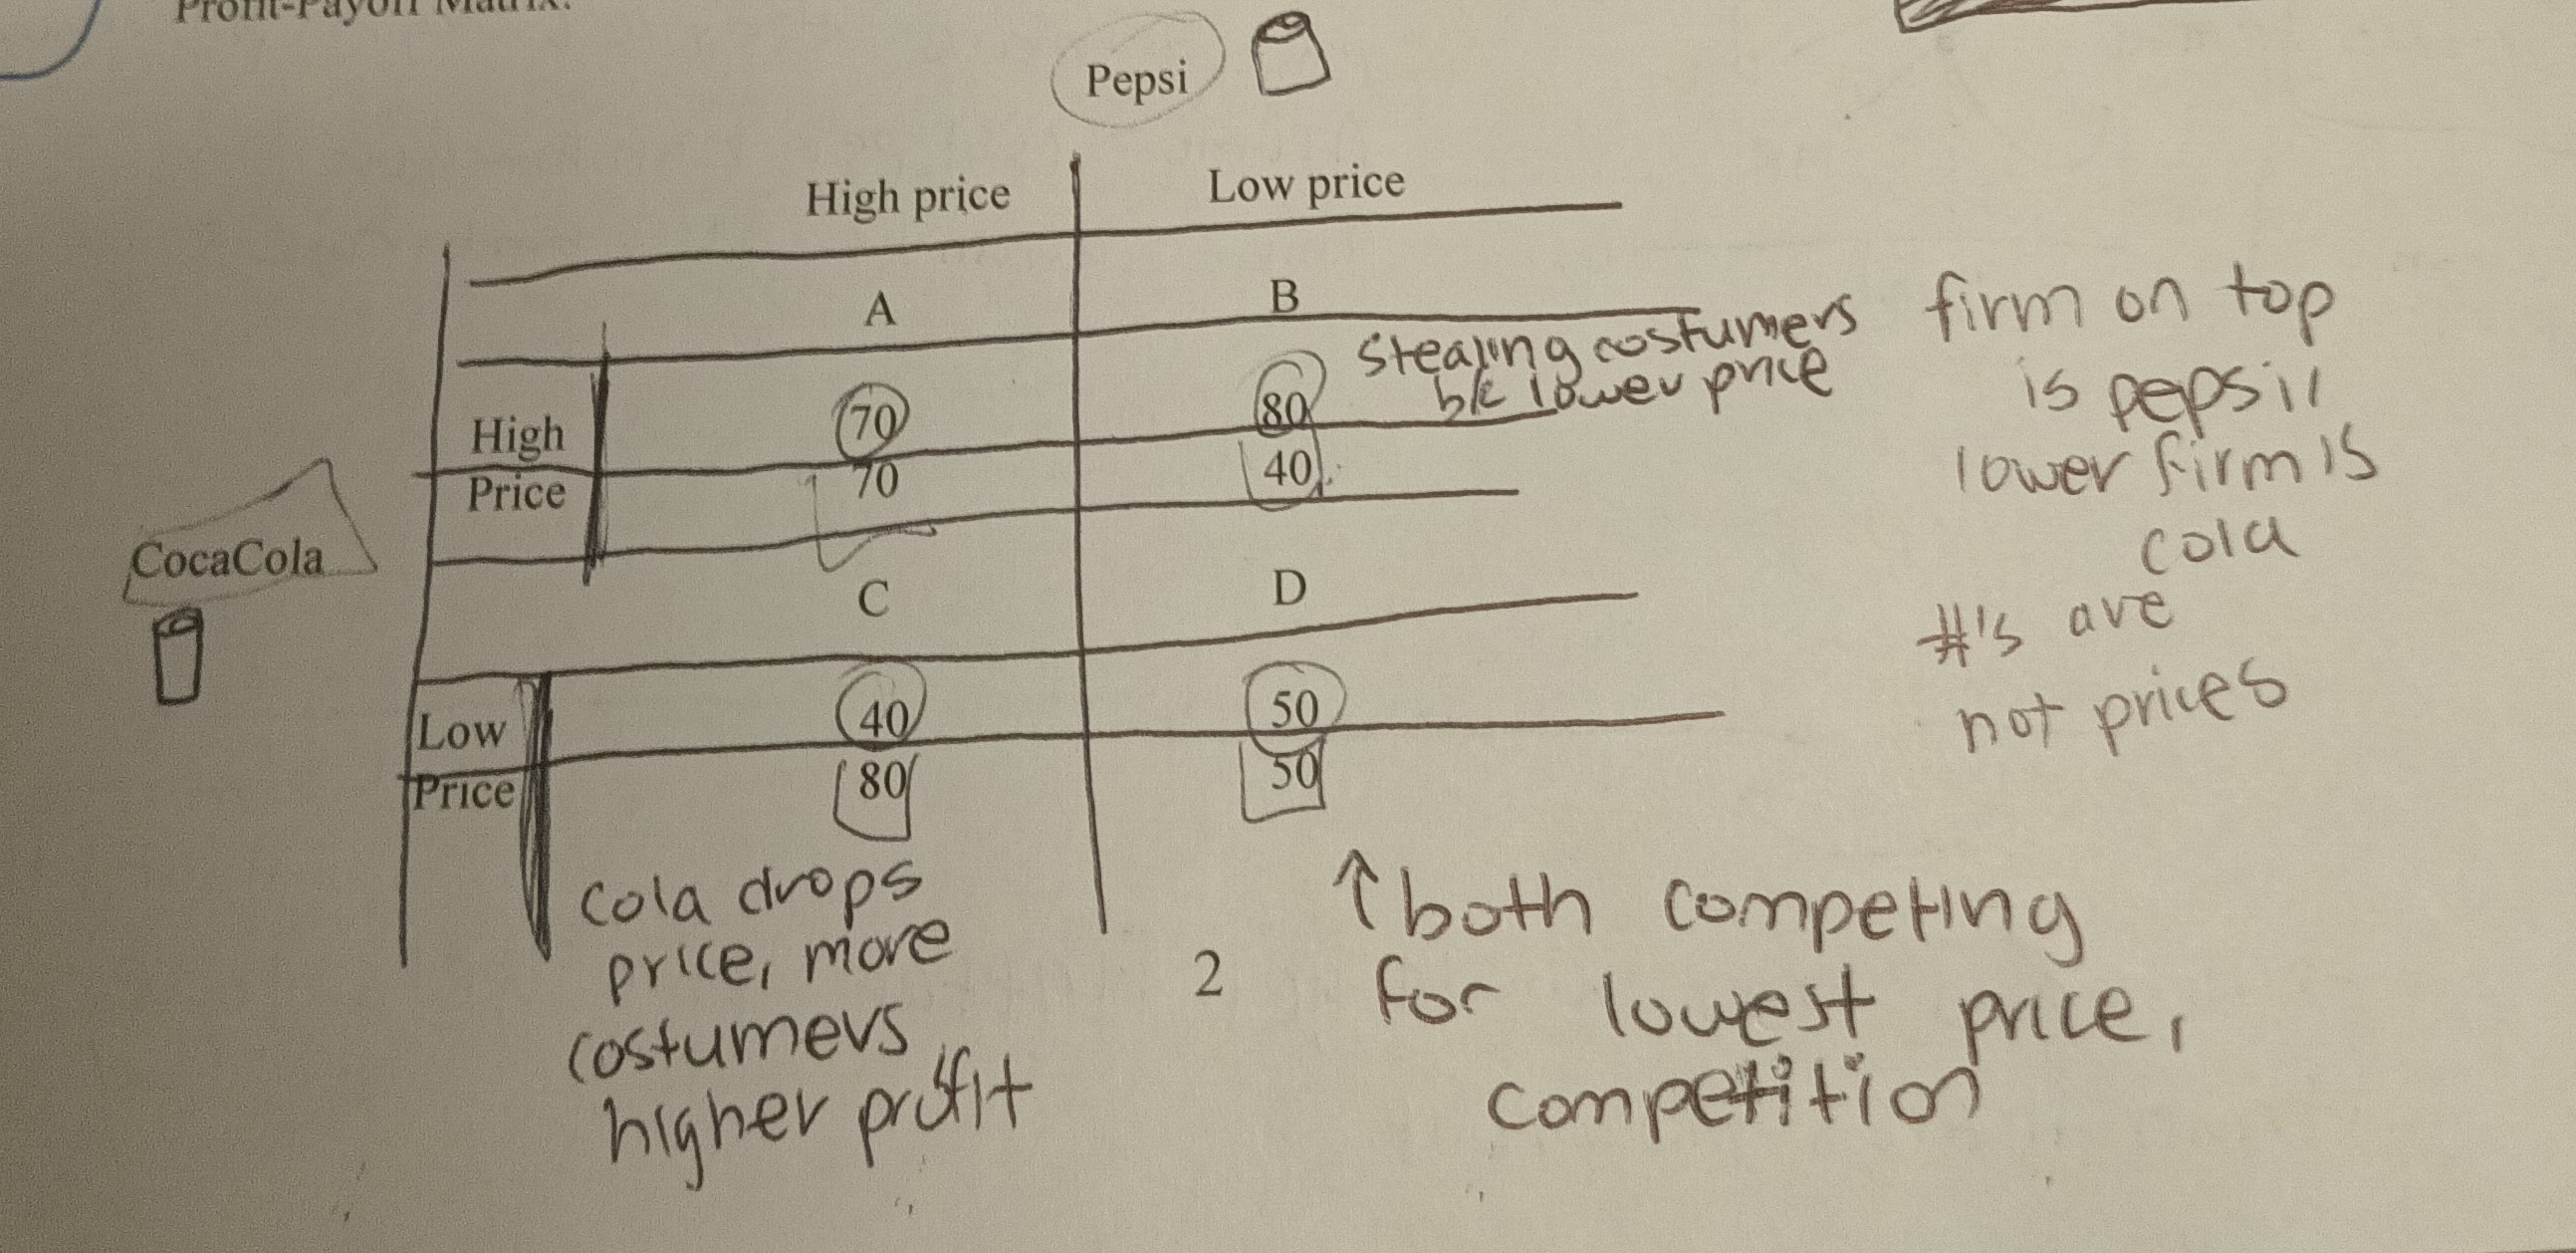 <p>Payoff matrix has different cells which represent different price strategies for the two firms</p><ul><li><p>Cell A represents the situation where both firms keep their prices high; here both firms make a high profit; this cell represents cooperative behavior by the firms; i.e., the 2 firms cooperate to charge a high price</p></li><li><p>Cell B and C represent the situation where one firm cooperates but the other doesn’t; this means one firm charges a high price while the other firm charges a low price; these 2 cells represent situations where one of the firms cheats; the cheating firm charges a low price and makes high profits while the cooperating firm charges a high price and makes low profits.</p></li><li><p>Cell D represents the situation where both firms charge a low price; both make the same low profits; this cell represents competition by both the firms.</p></li></ul><p>This type of game theory represents the prisoners dilemma, where the best option is to have both people rat on each other or Cell D where both firms lower their prices.</p>